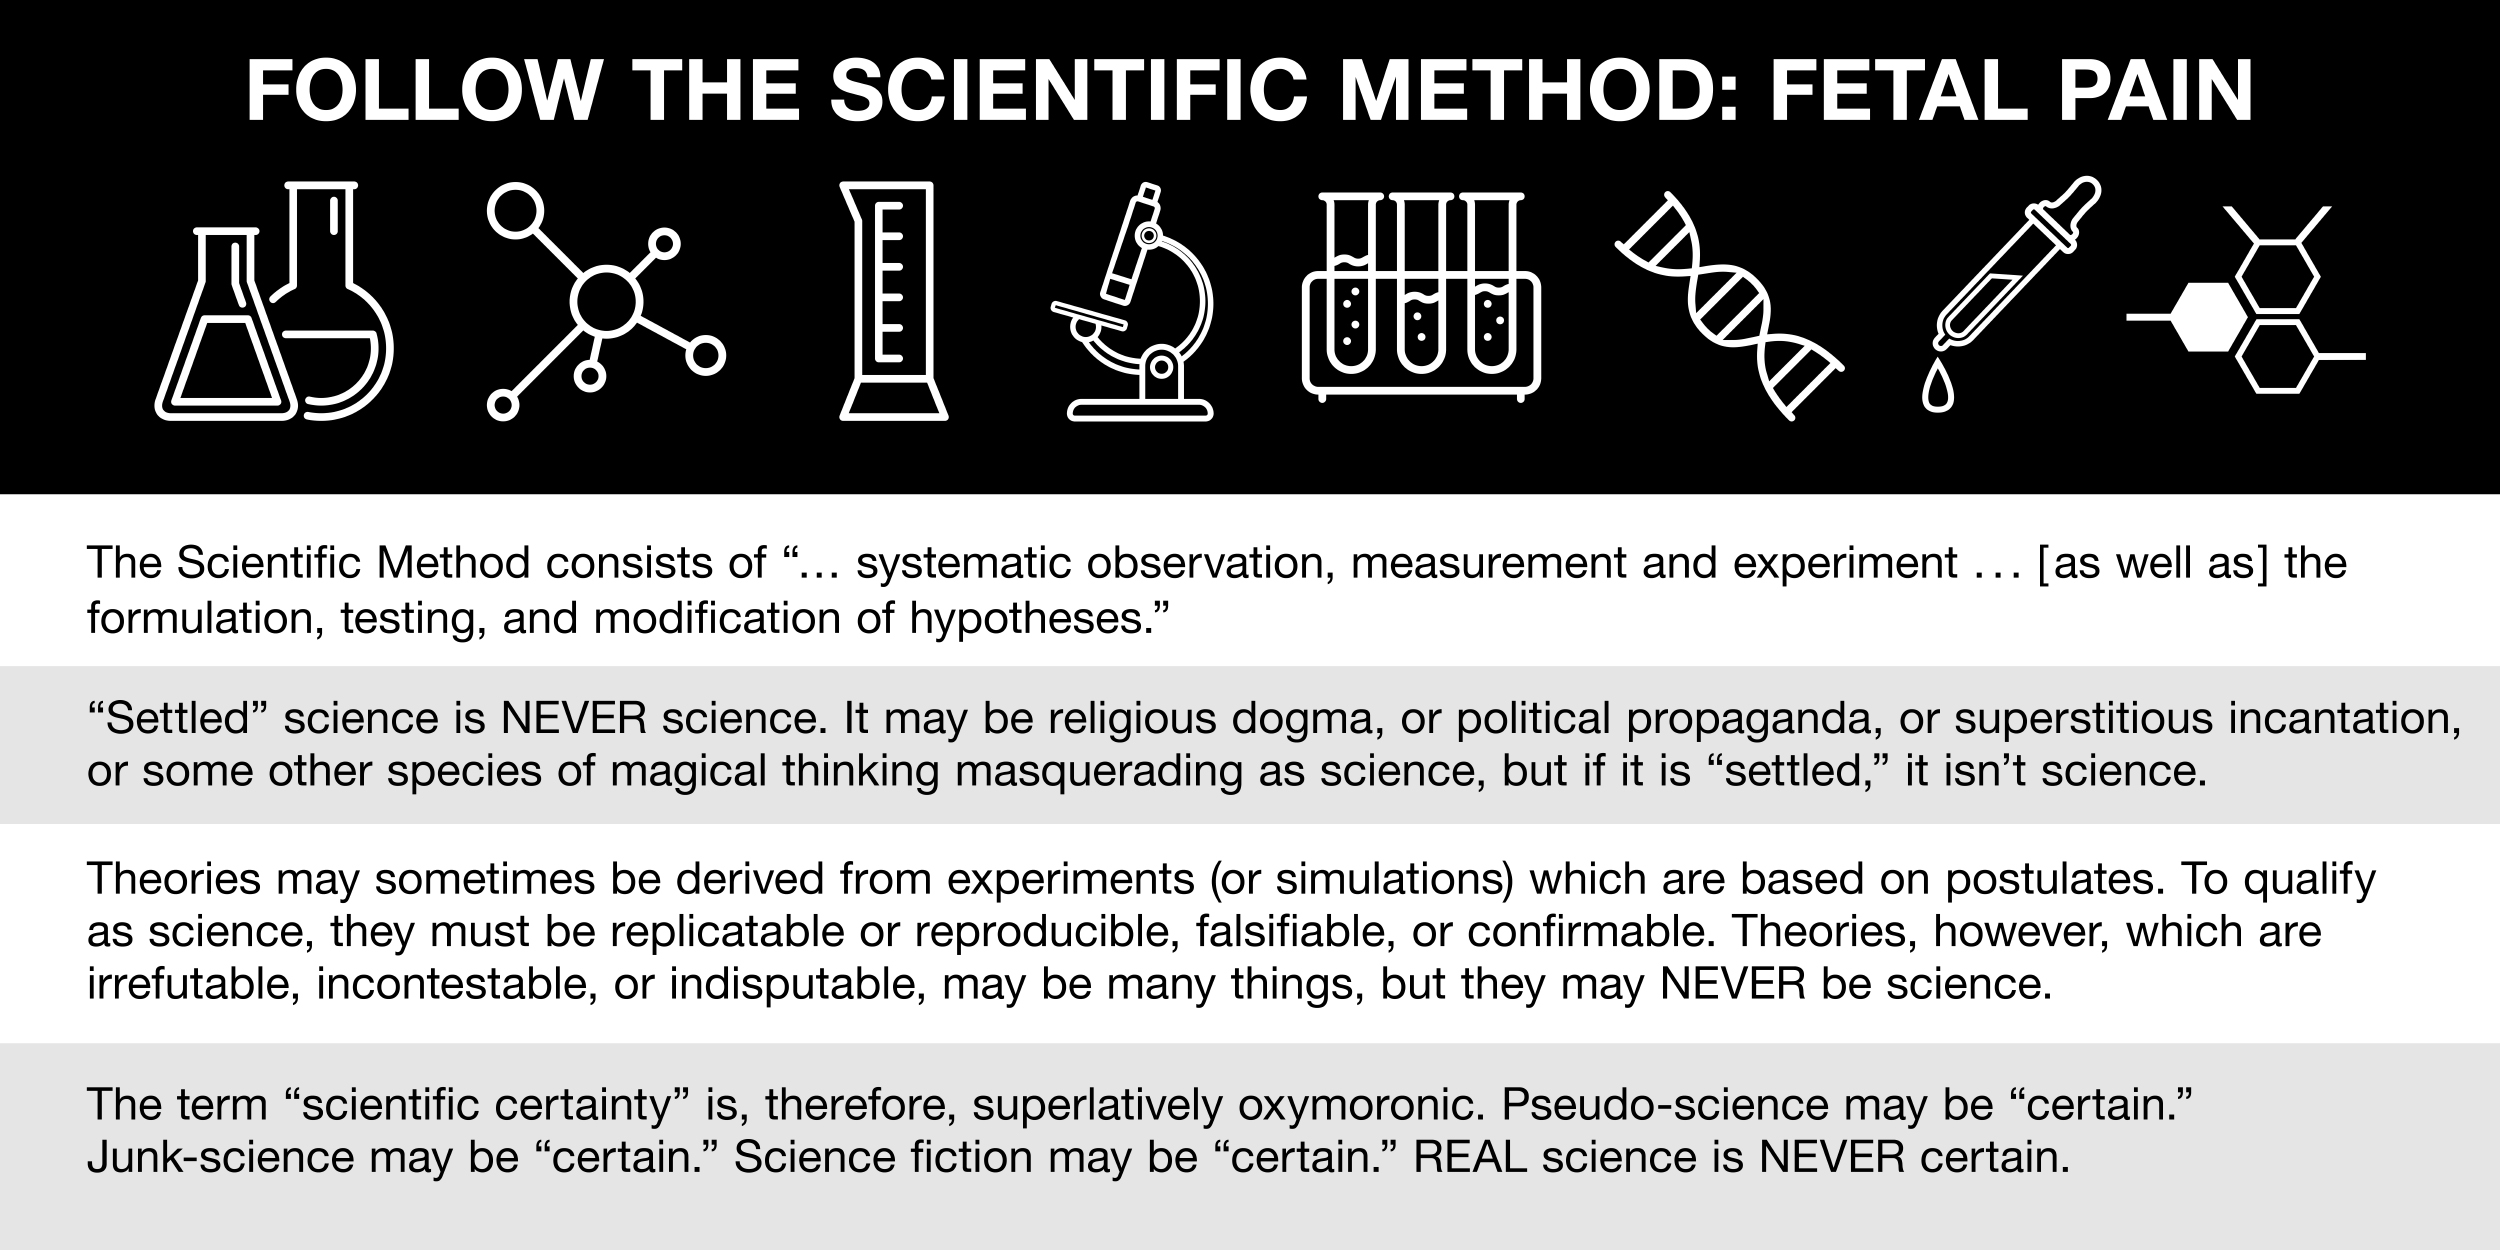 Follow the Scientific Method: Settled science is NEVER science